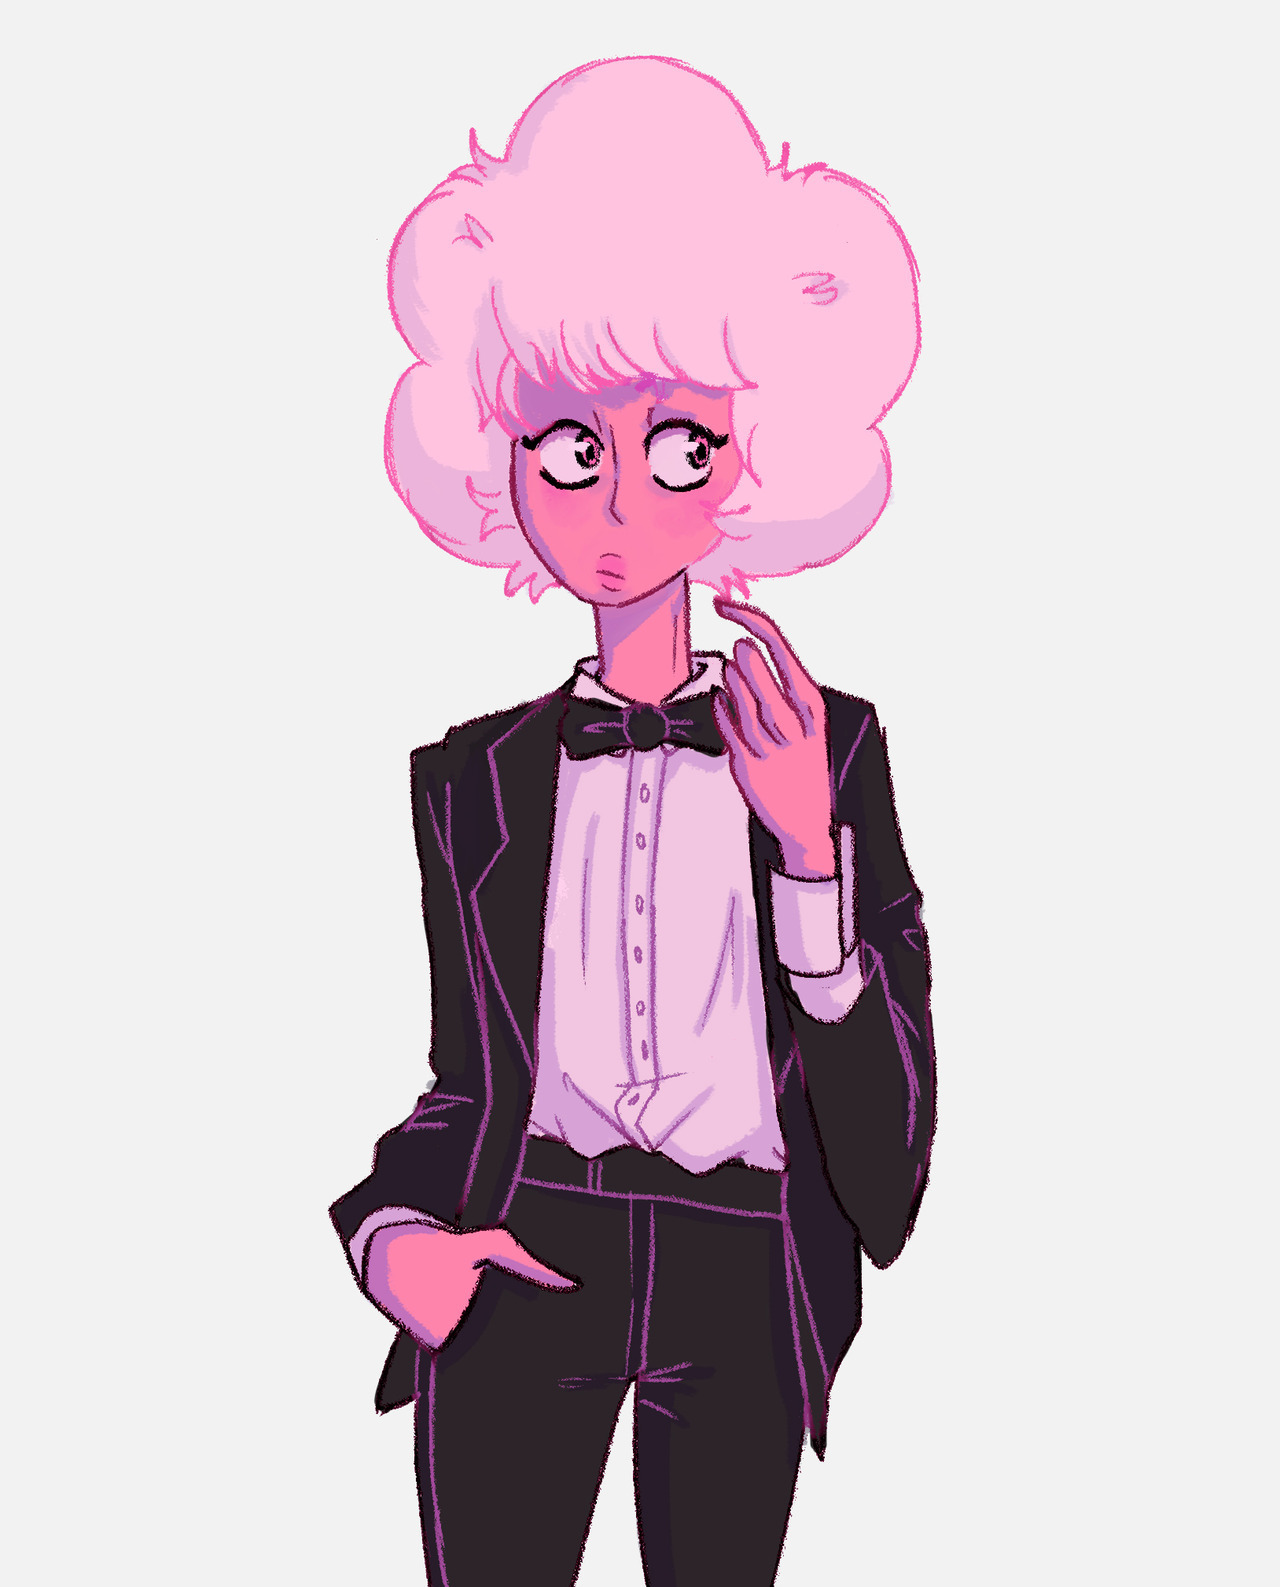 I have no excuse I just wanted to draw her in fancy clothes